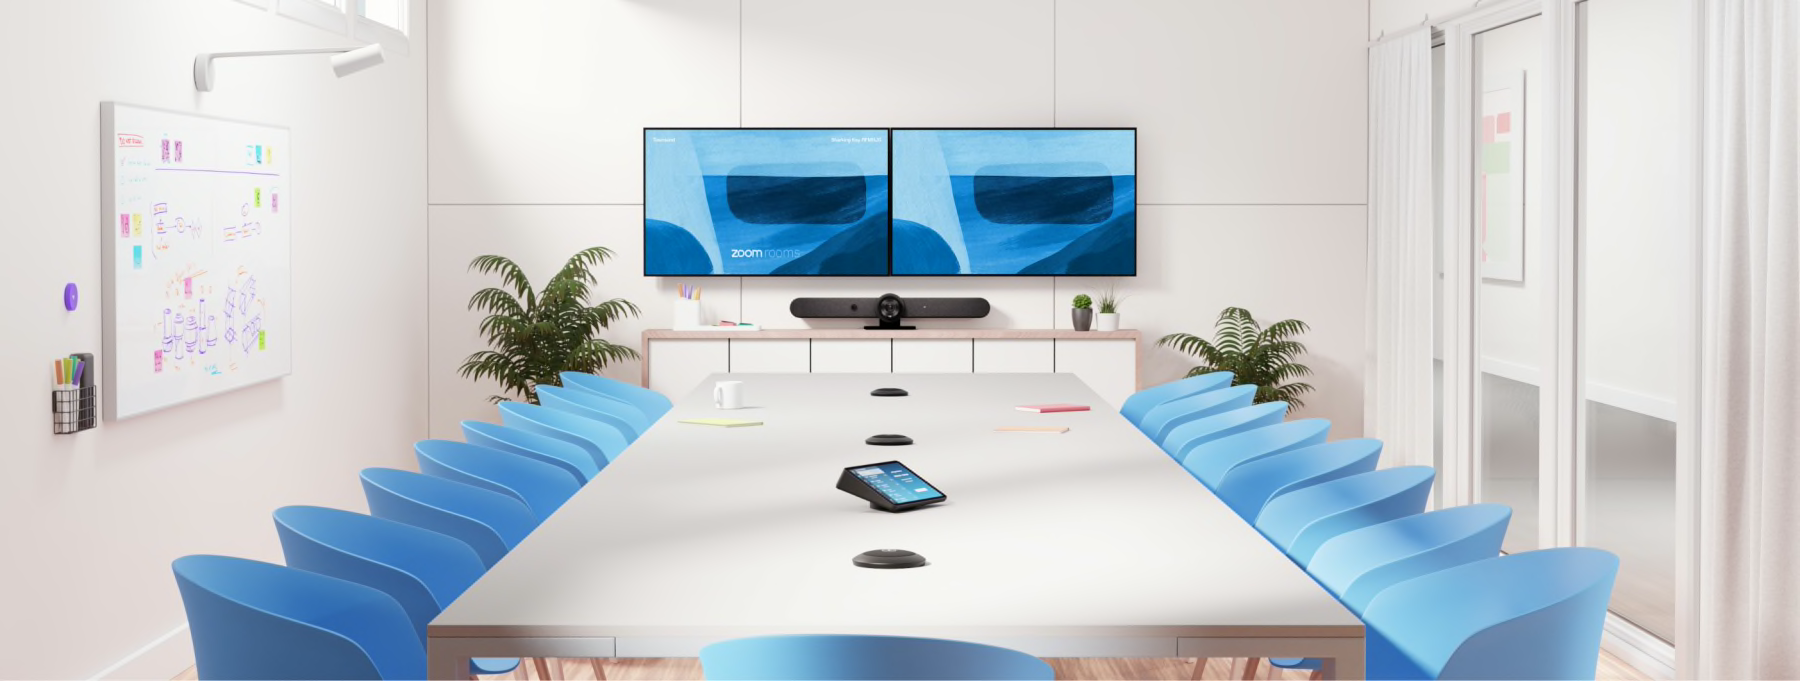 Zoom Solutions for boardroom space